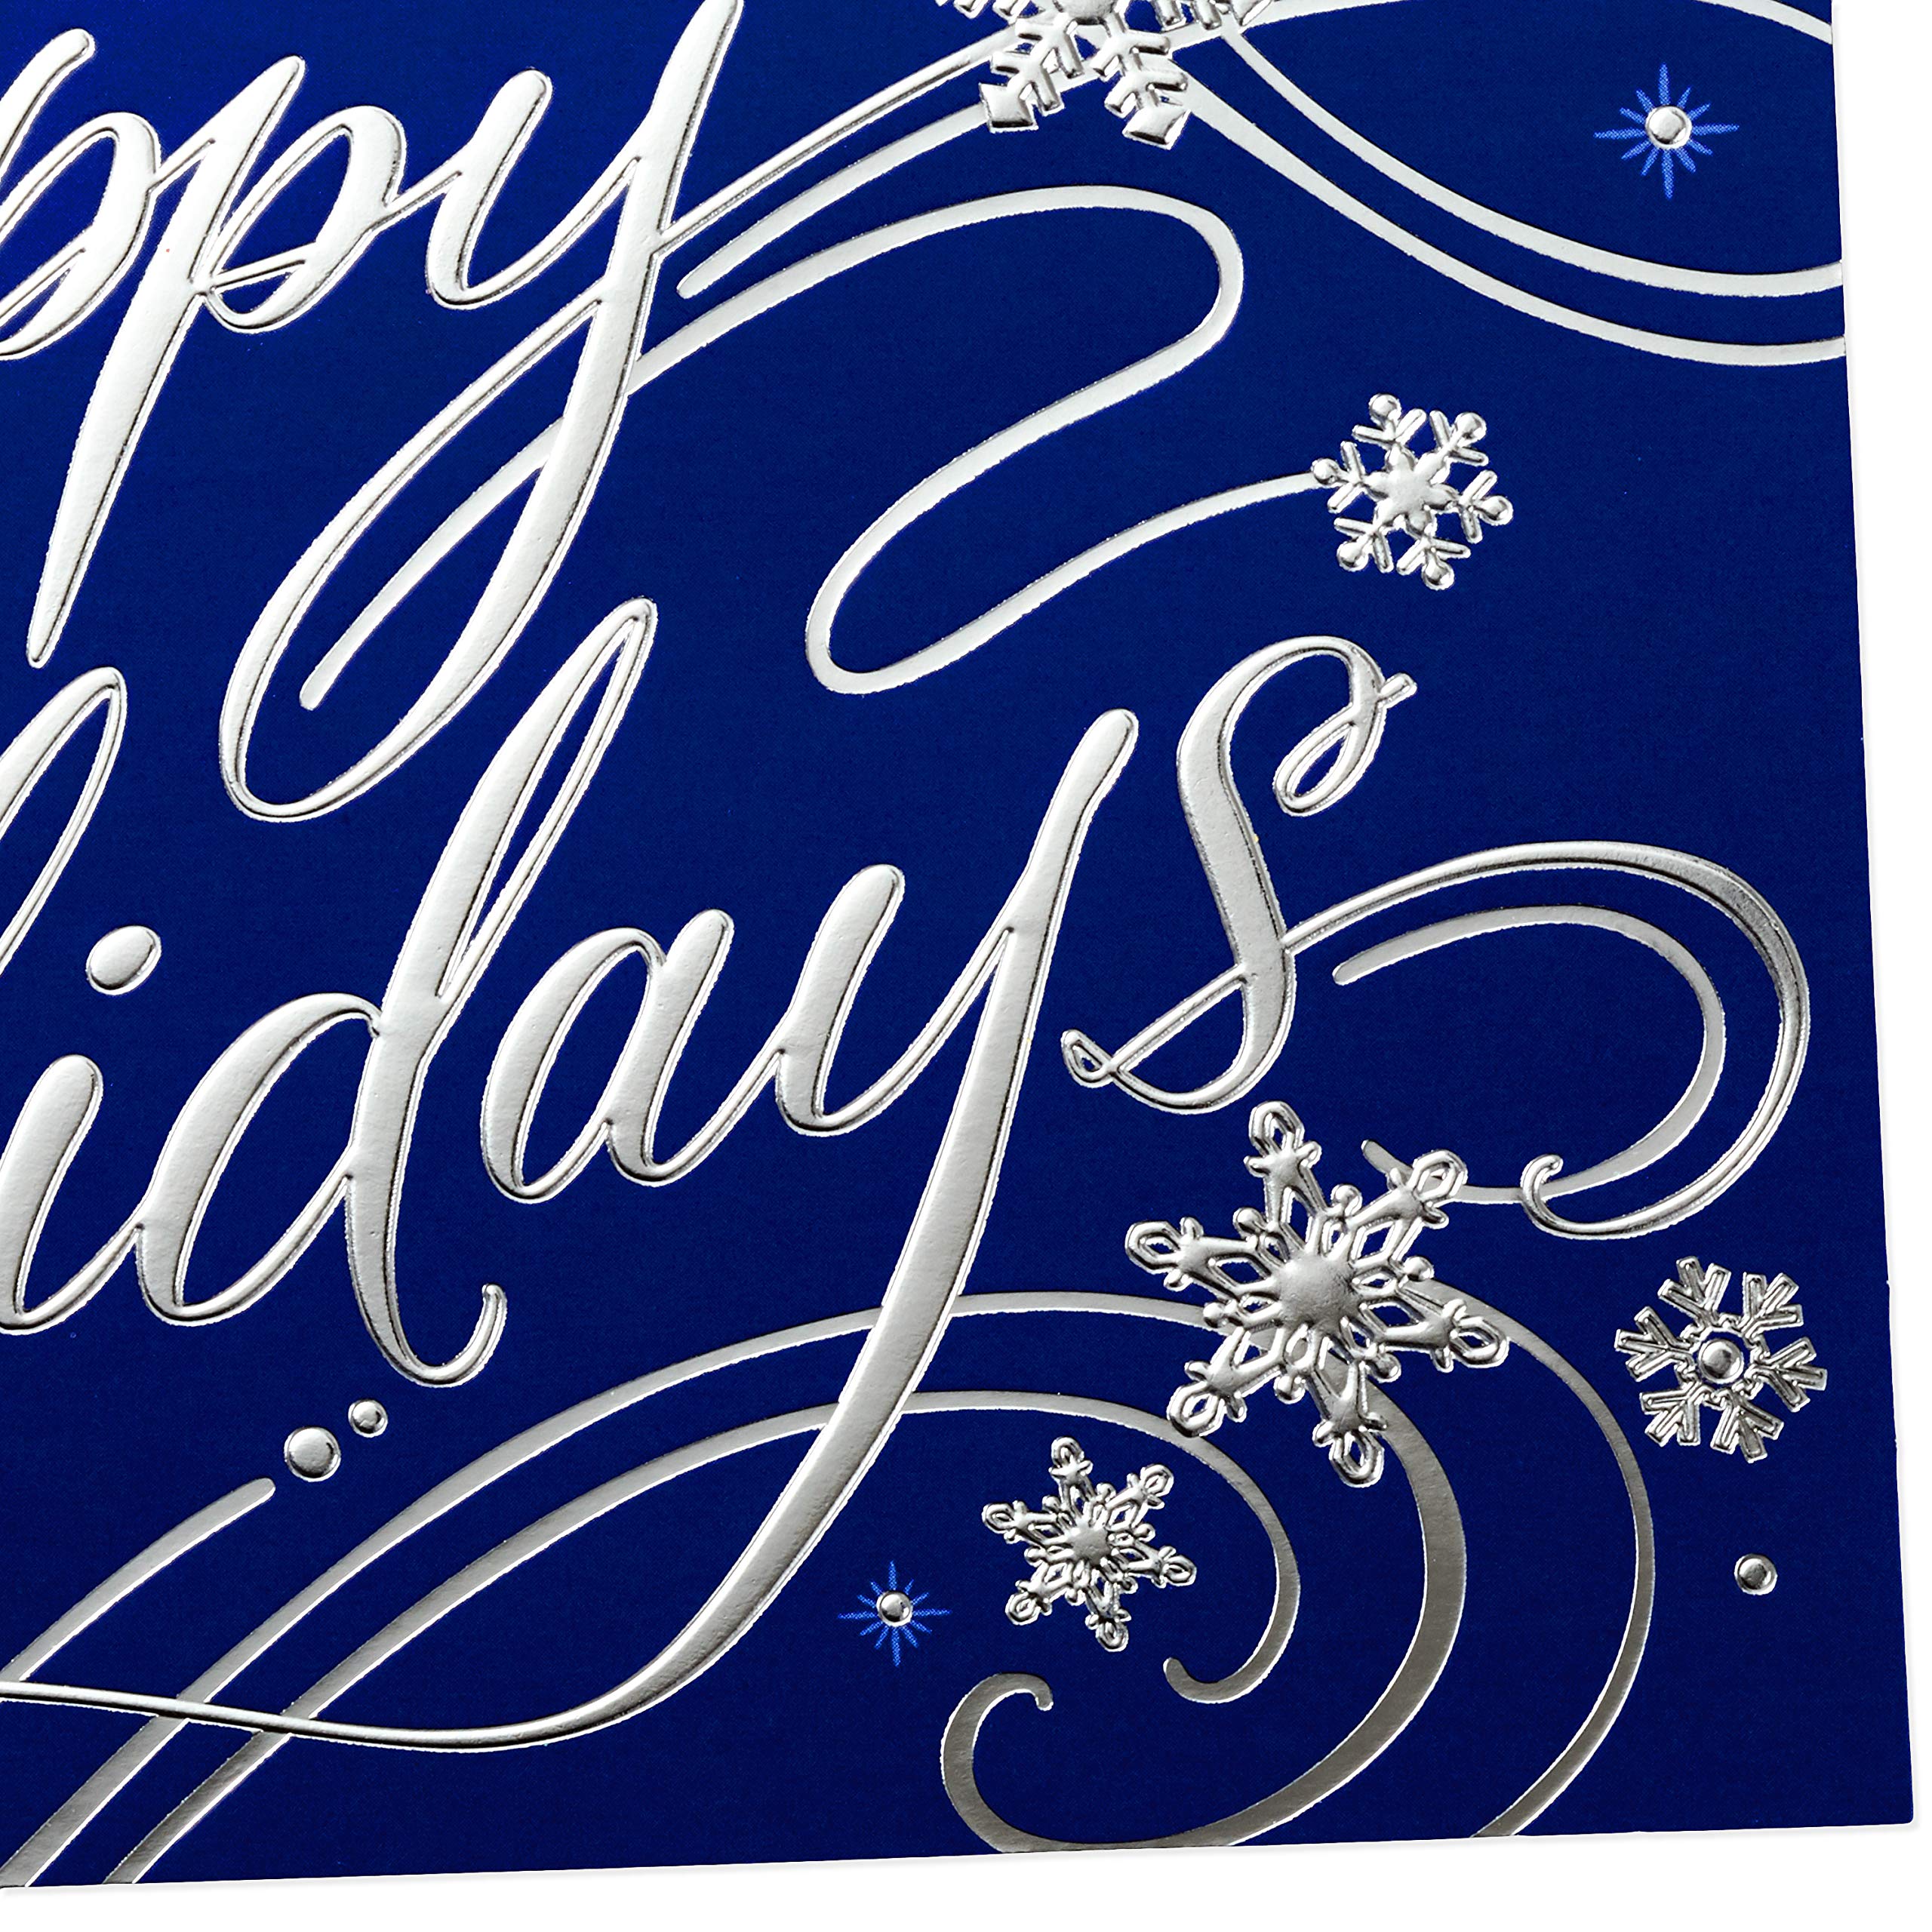 Hallmark Boxed Holiday Cards, Happy Holidays (40 Blue and Silver Cards with Envelopes)